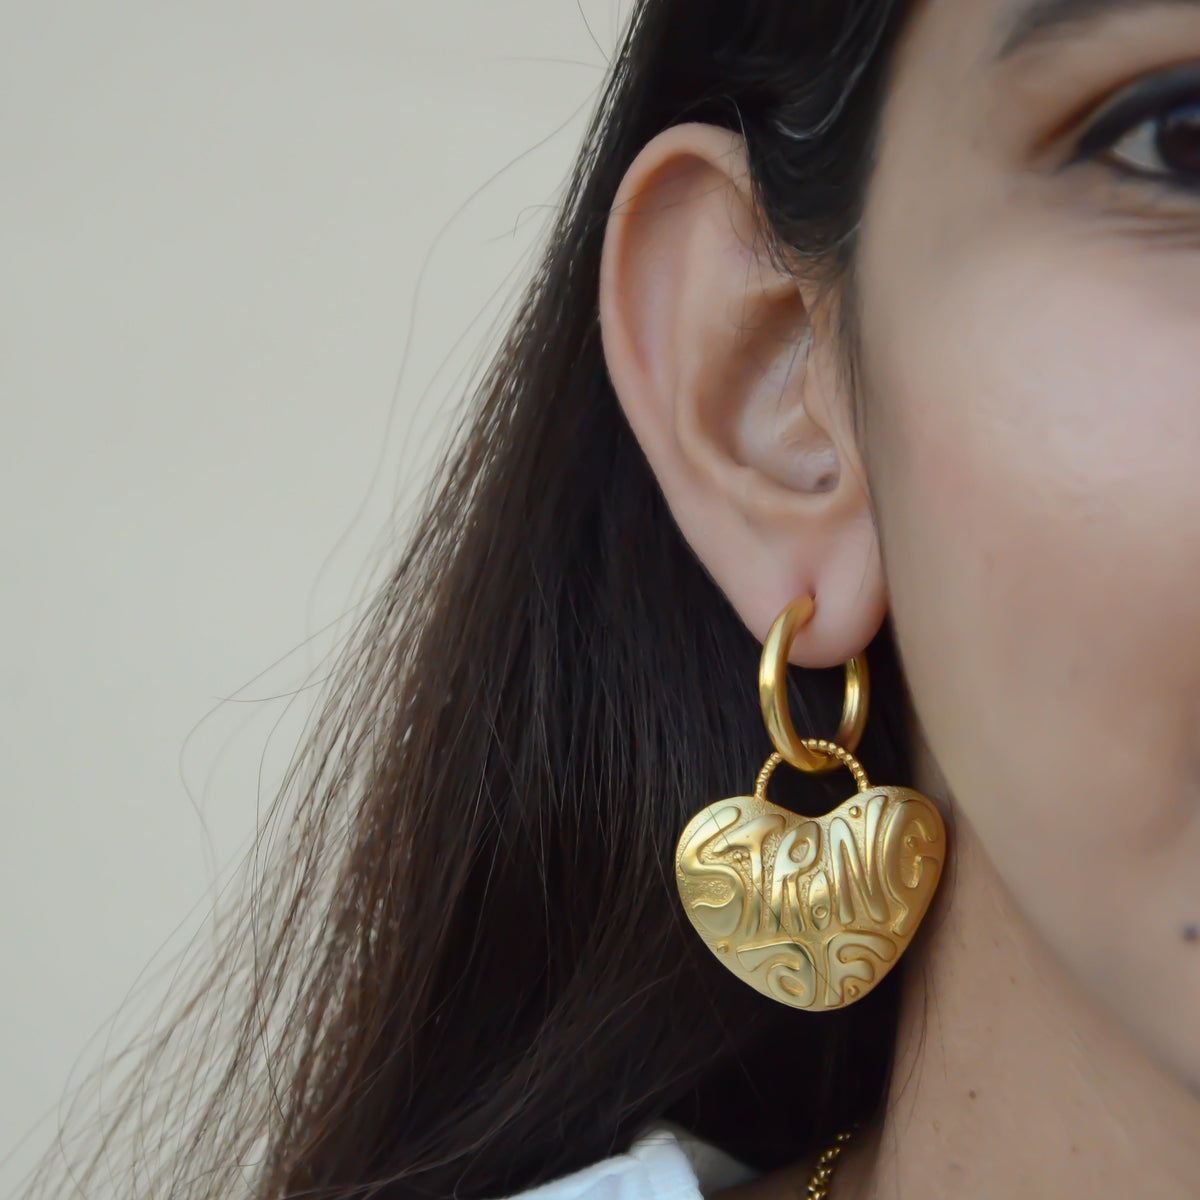 Strong AF Earrings